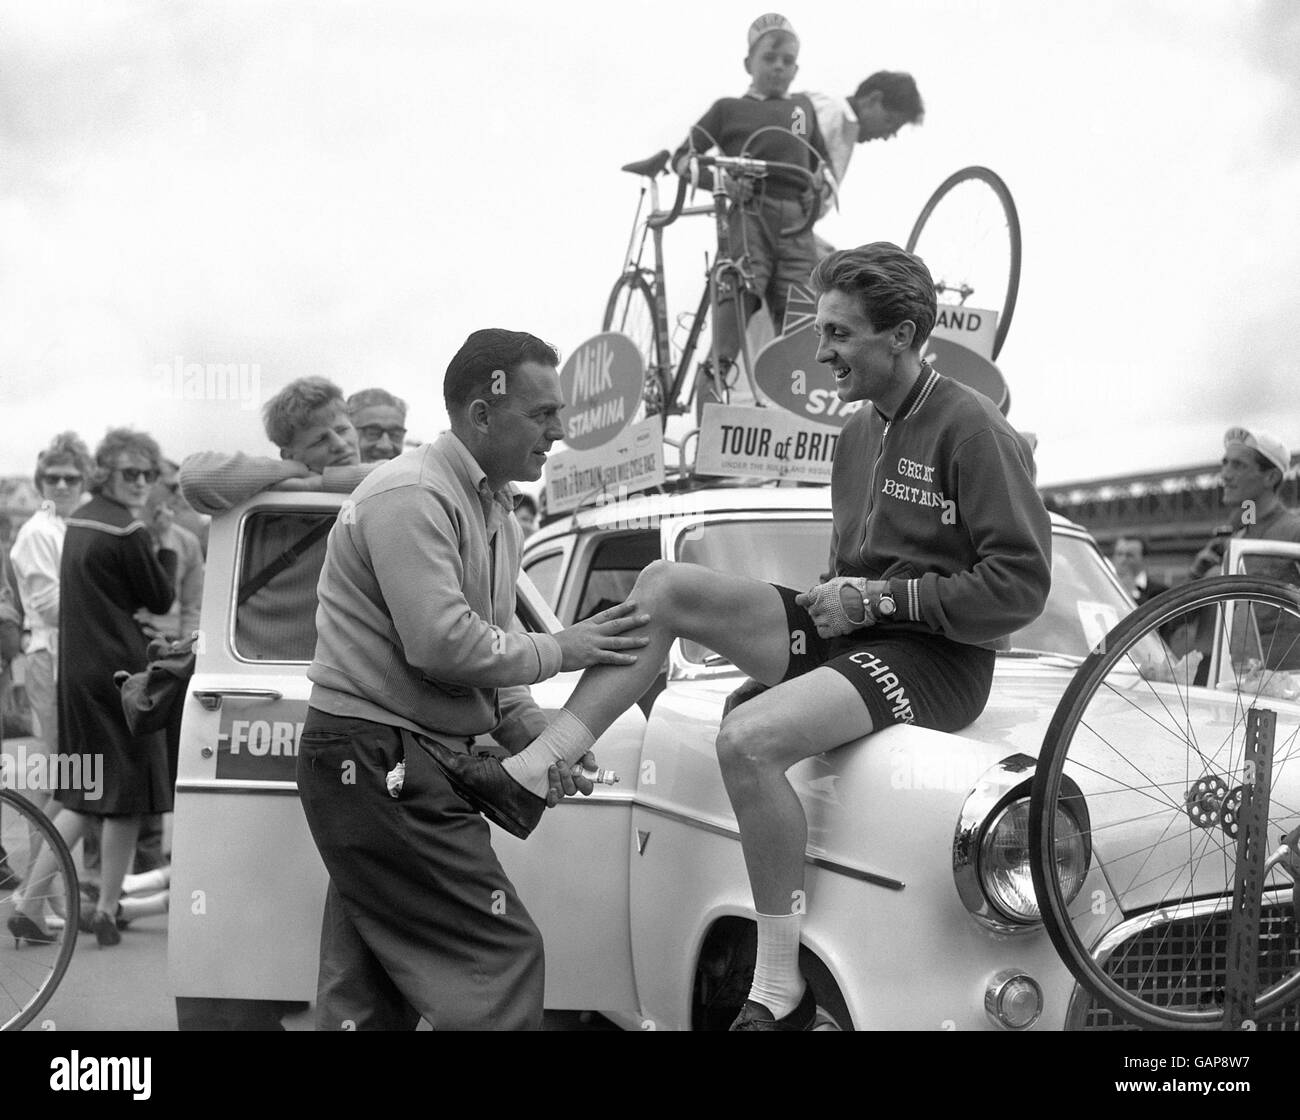 Cycling - Tour of Britain - London - 1960 Stock Photo